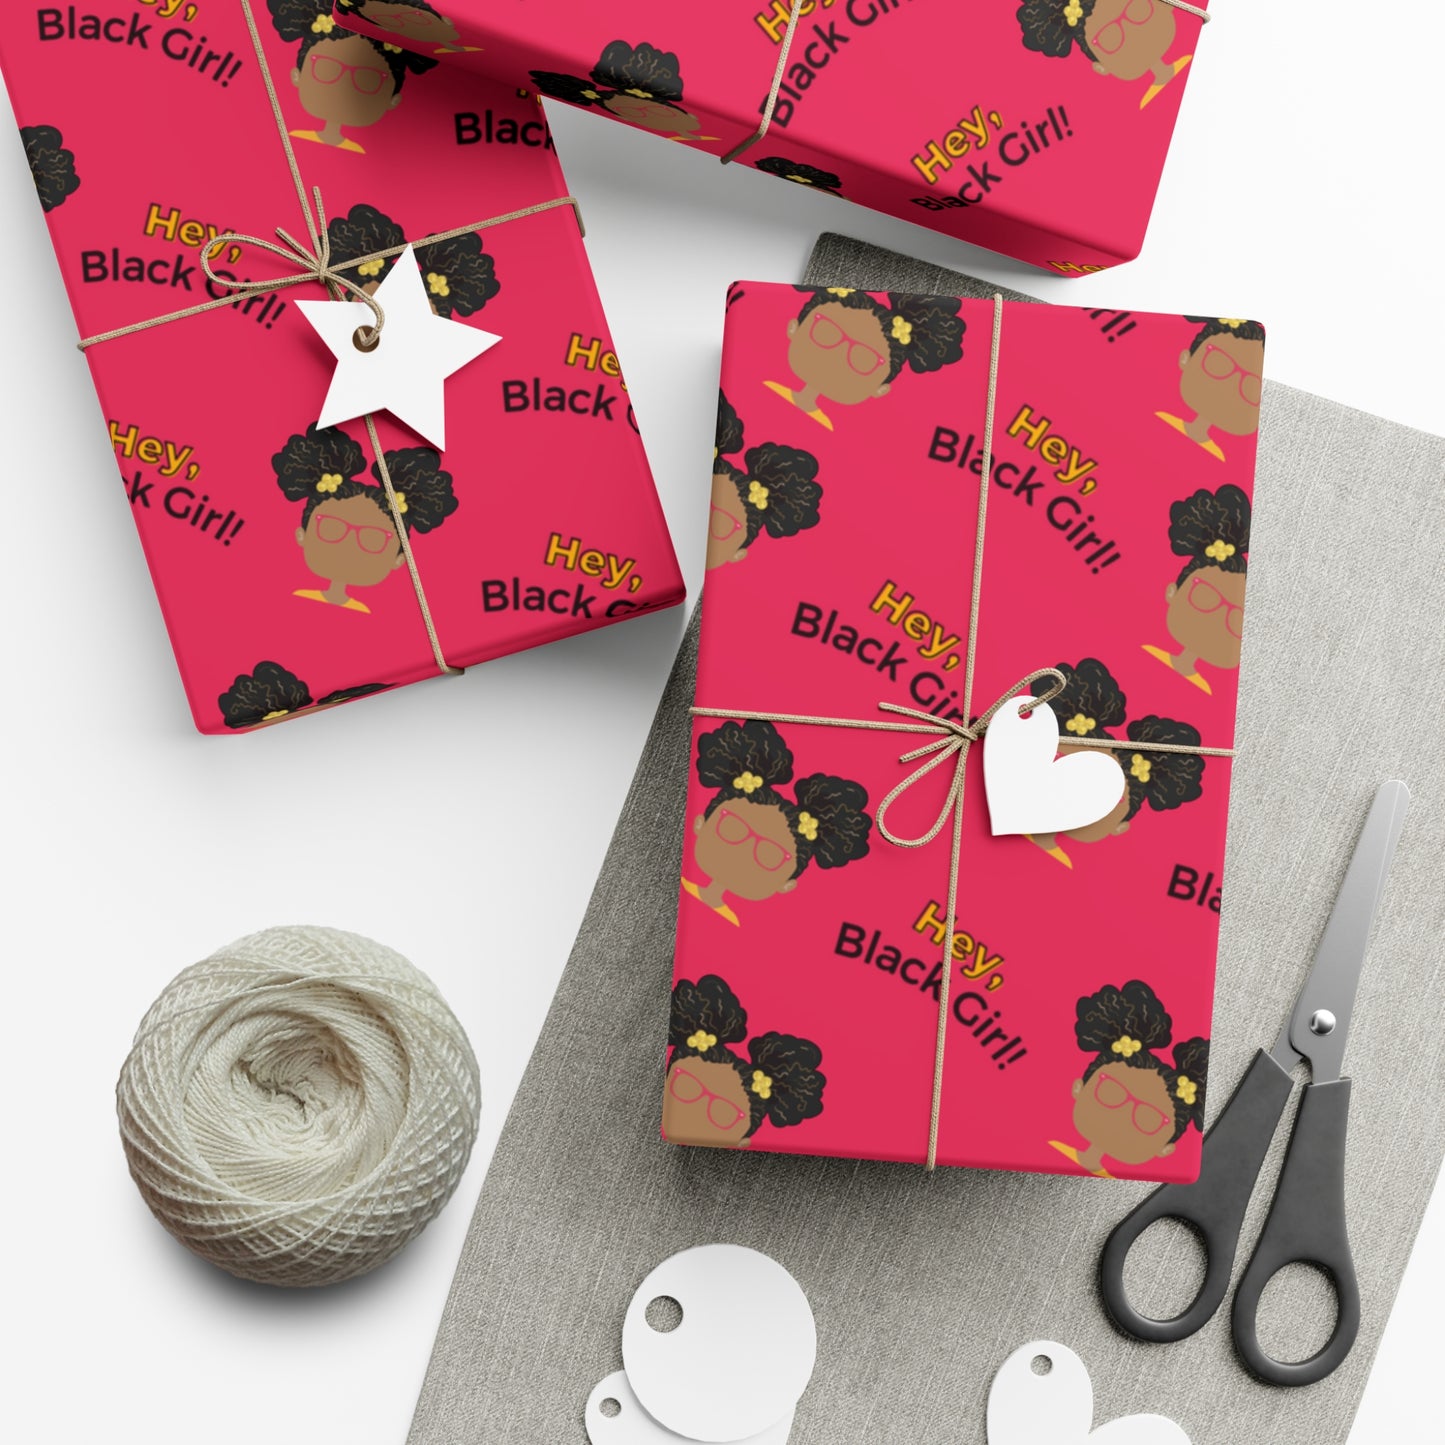 Hey, Black Girl! Gift Wrap Papers